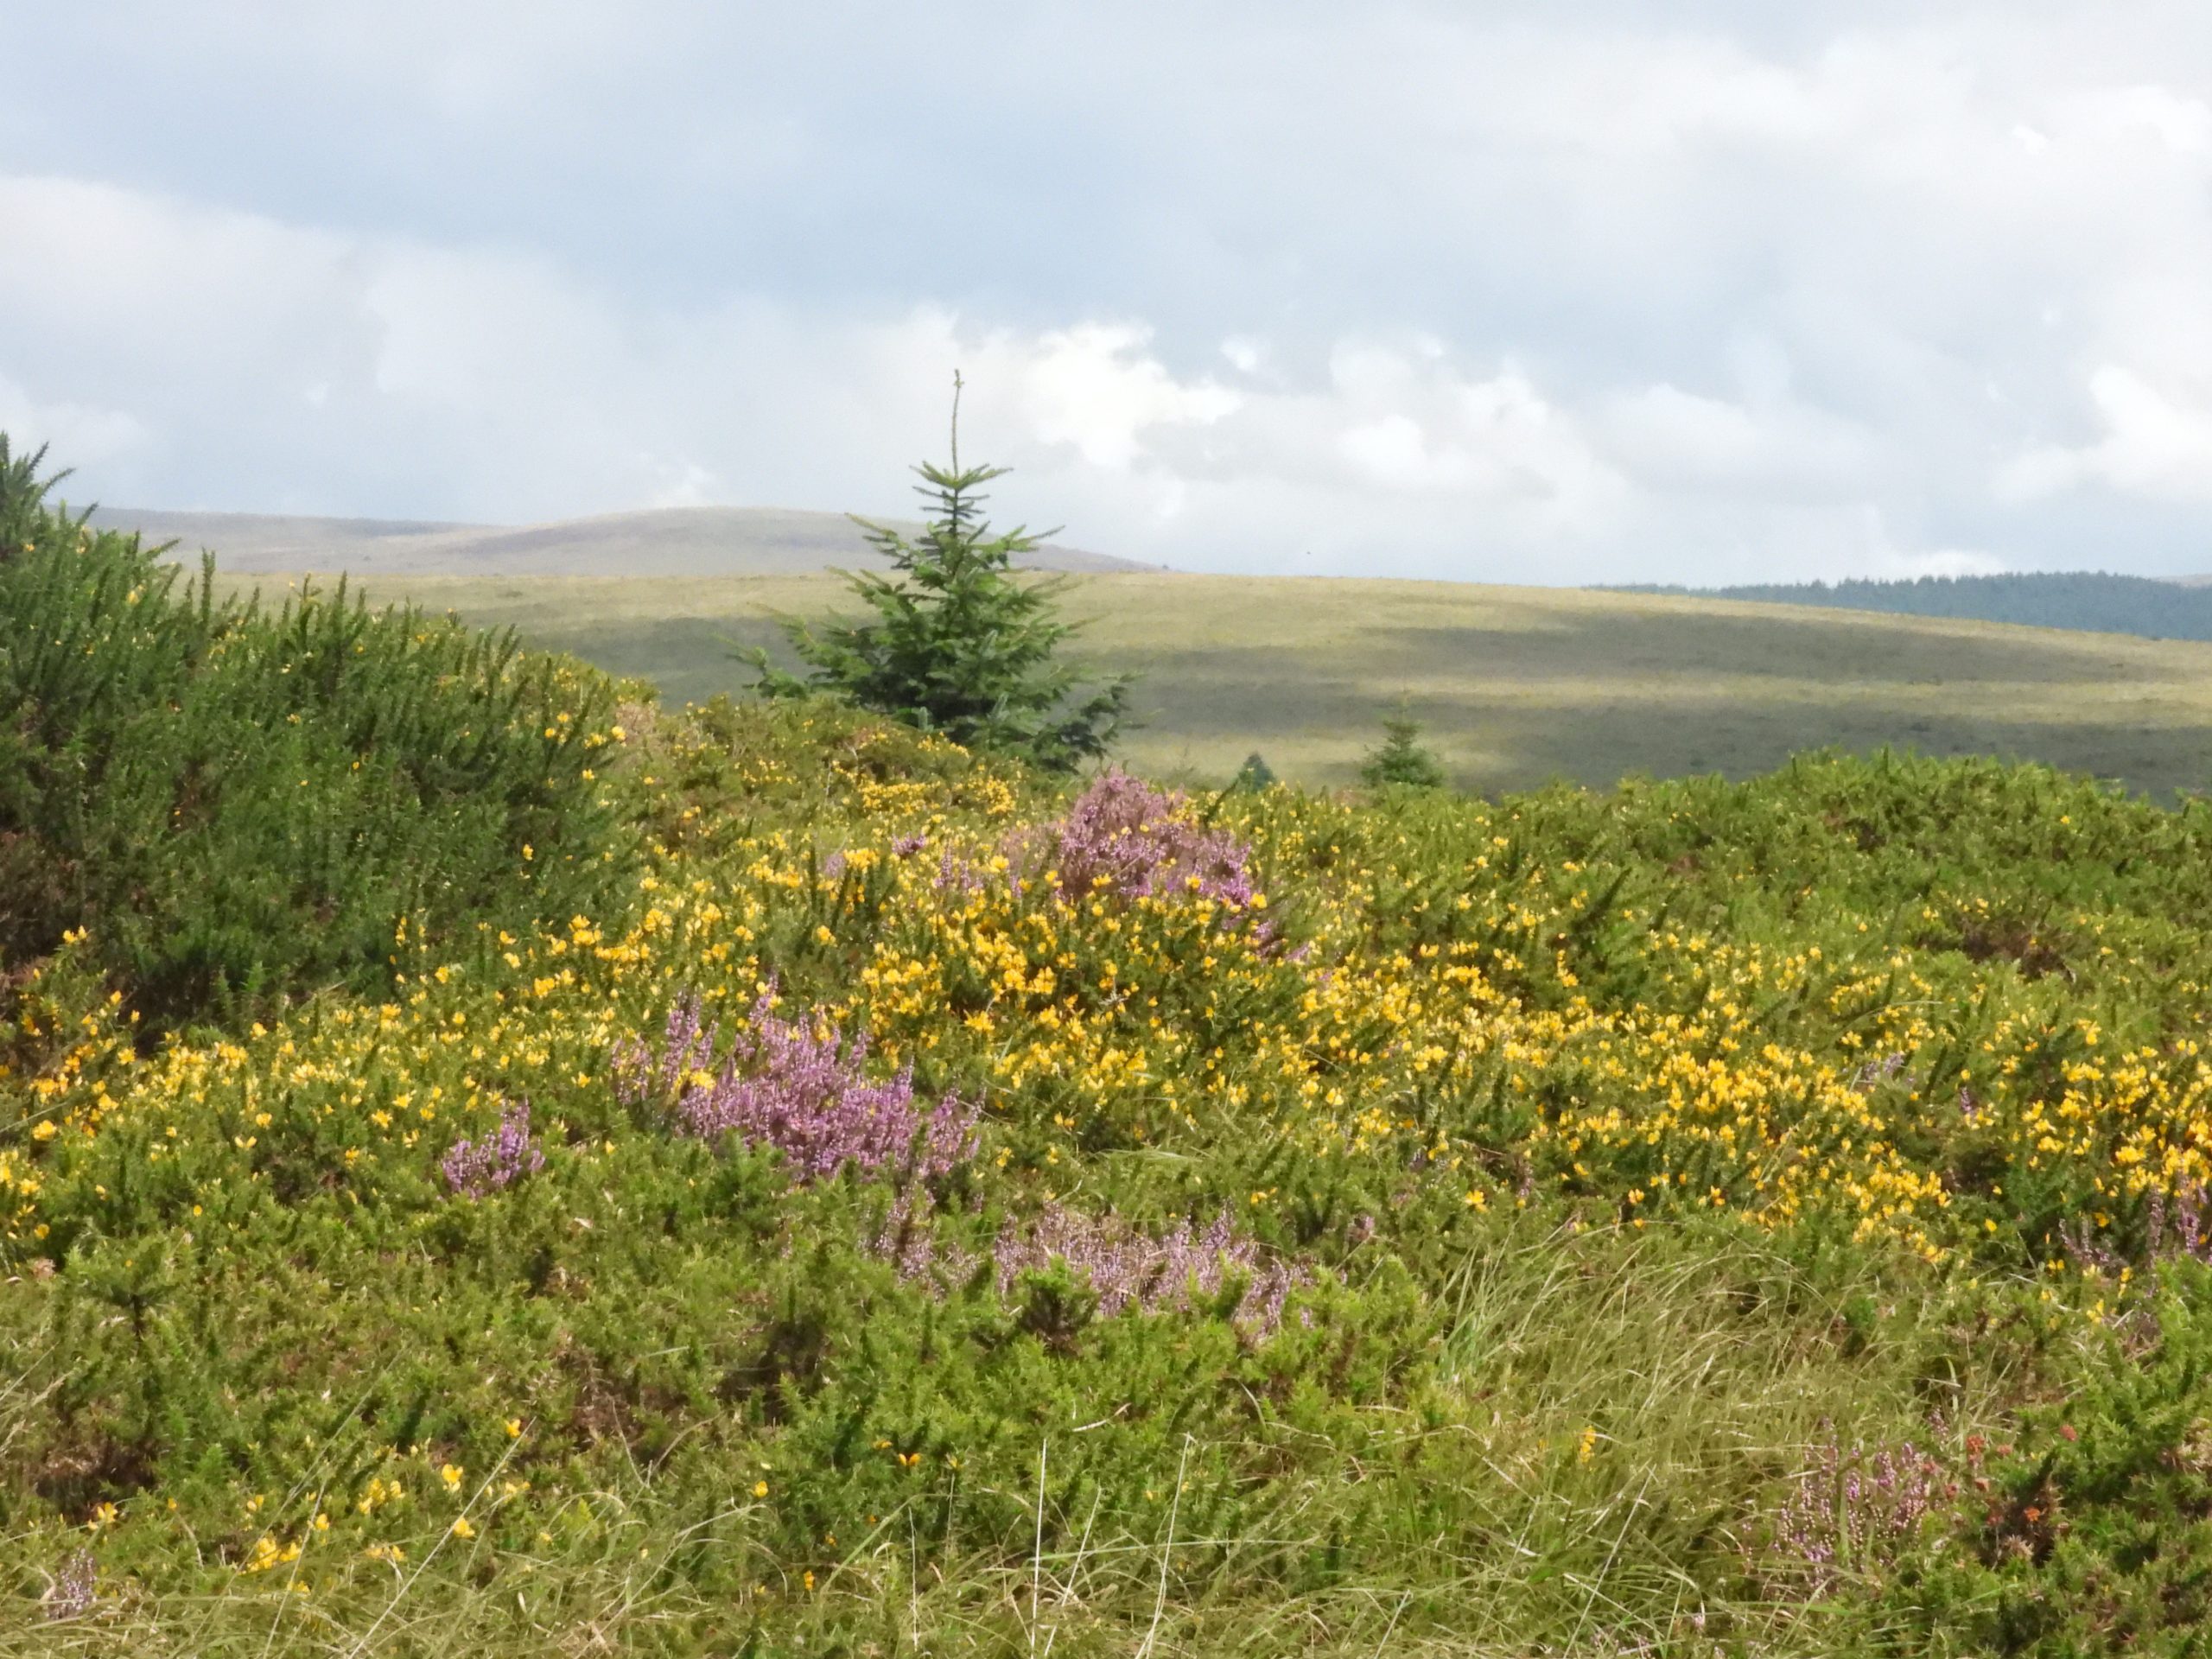 44. Heather and Gorse